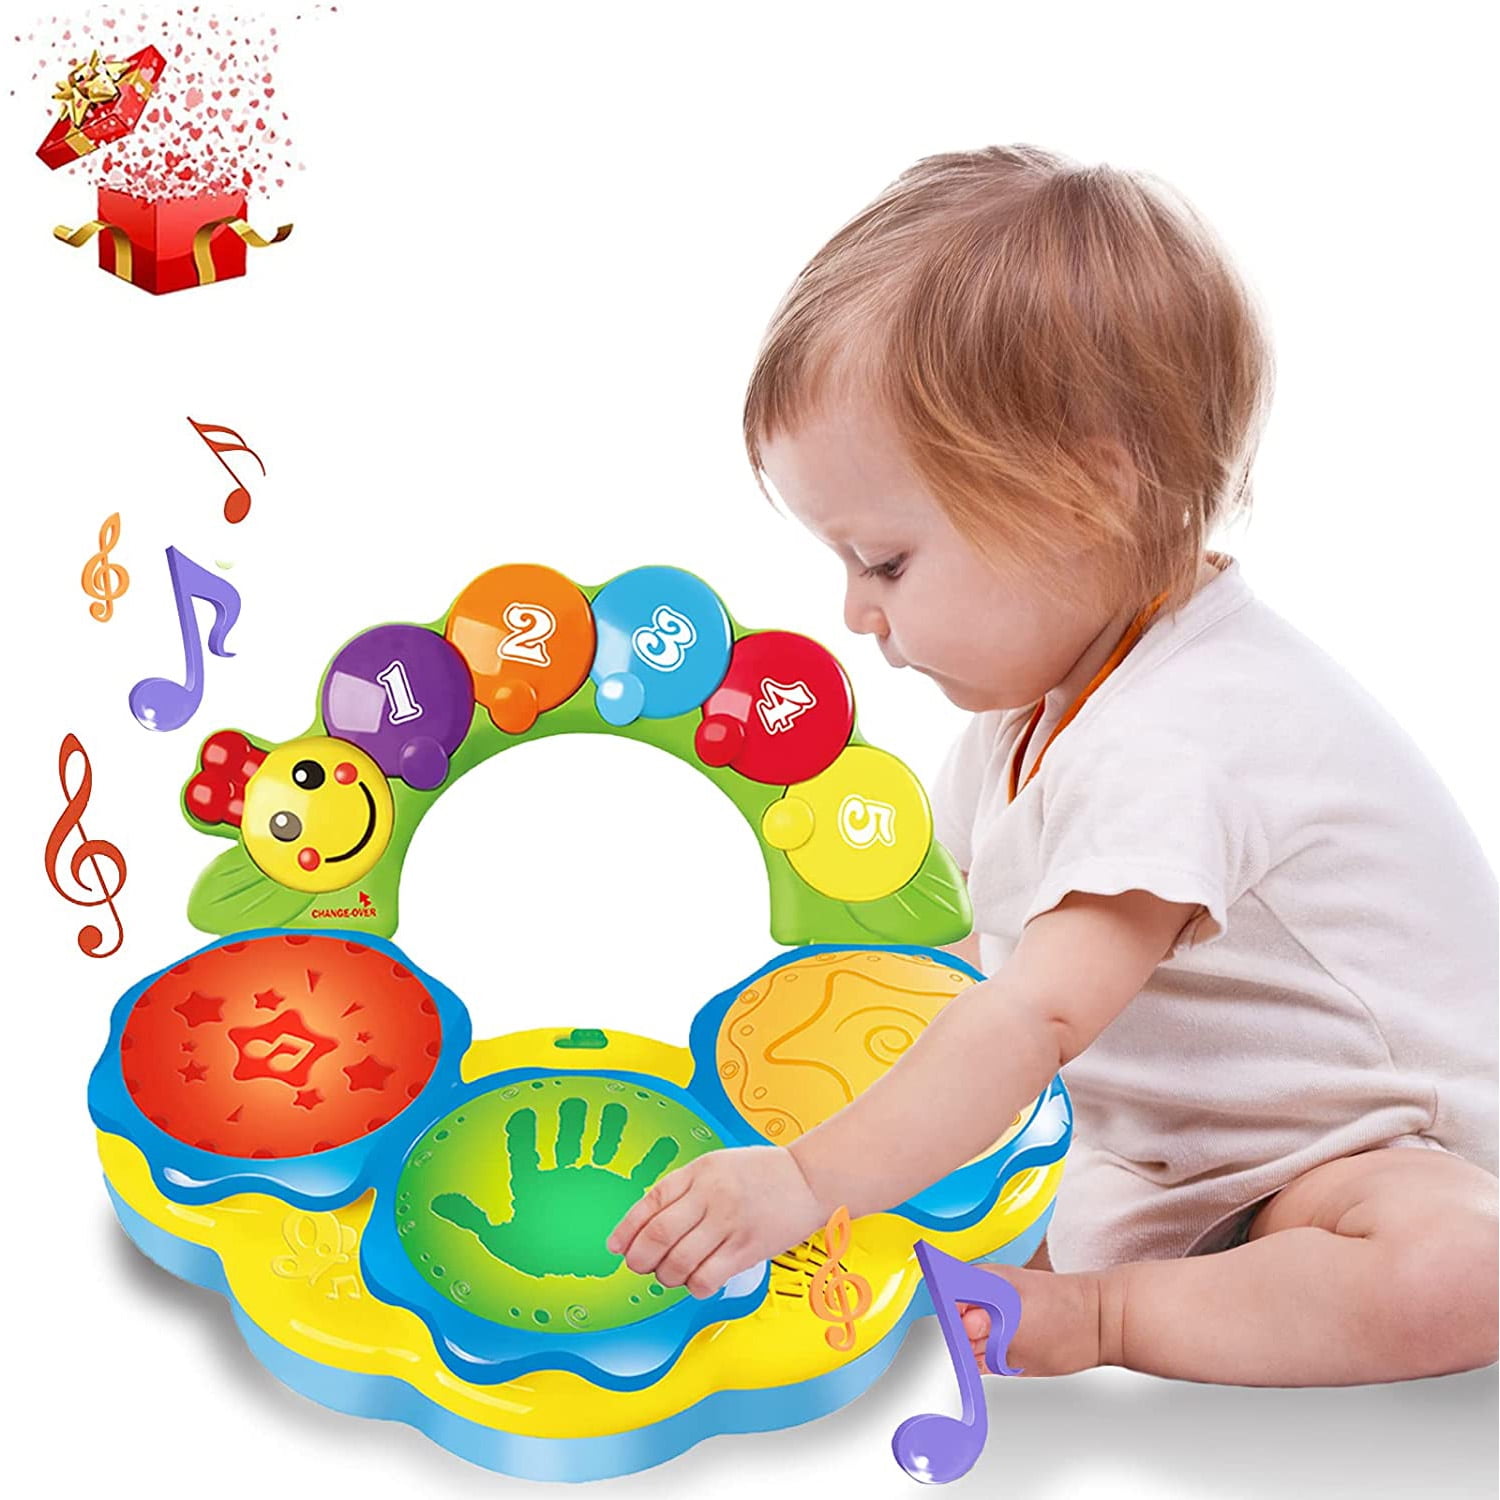 Baby Kids Toddler Sound Musical Early Educational Piano Developmental Toy Gift 